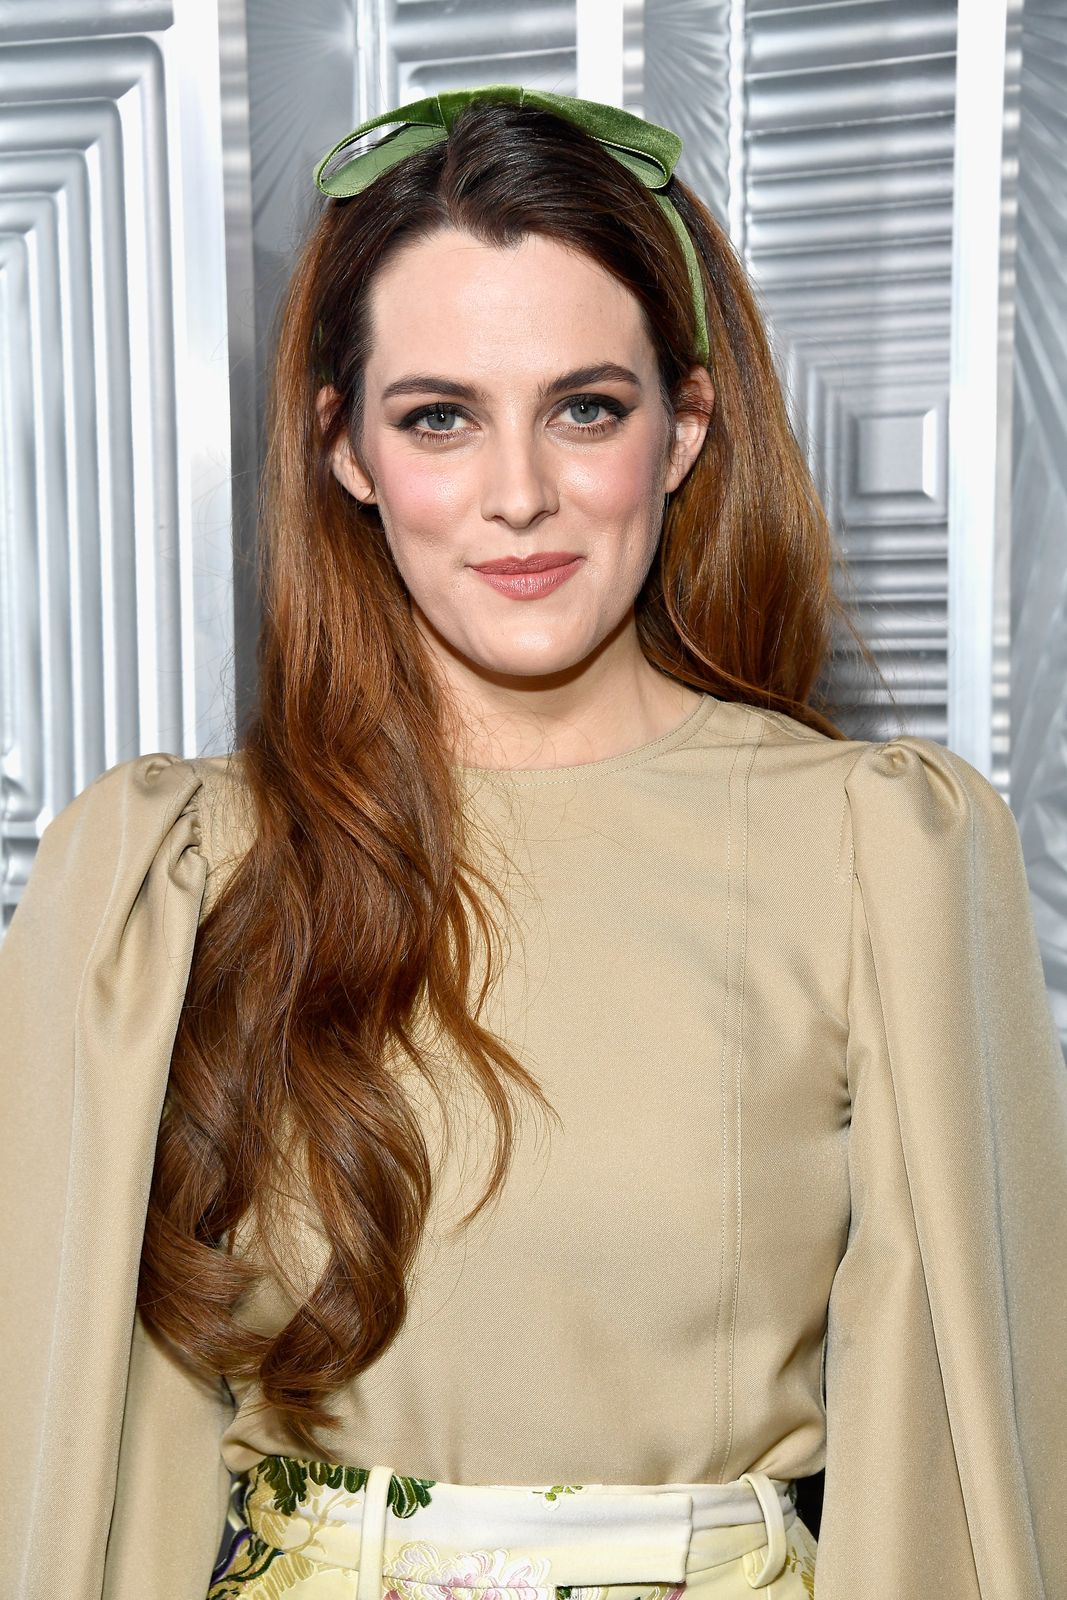 Riley Keough at "ELLE's" 24th Annual Women in Hollywood Celebration on October 16, 2017, in Los Angeles, California | Photo: Frazer Harrison/Getty Images